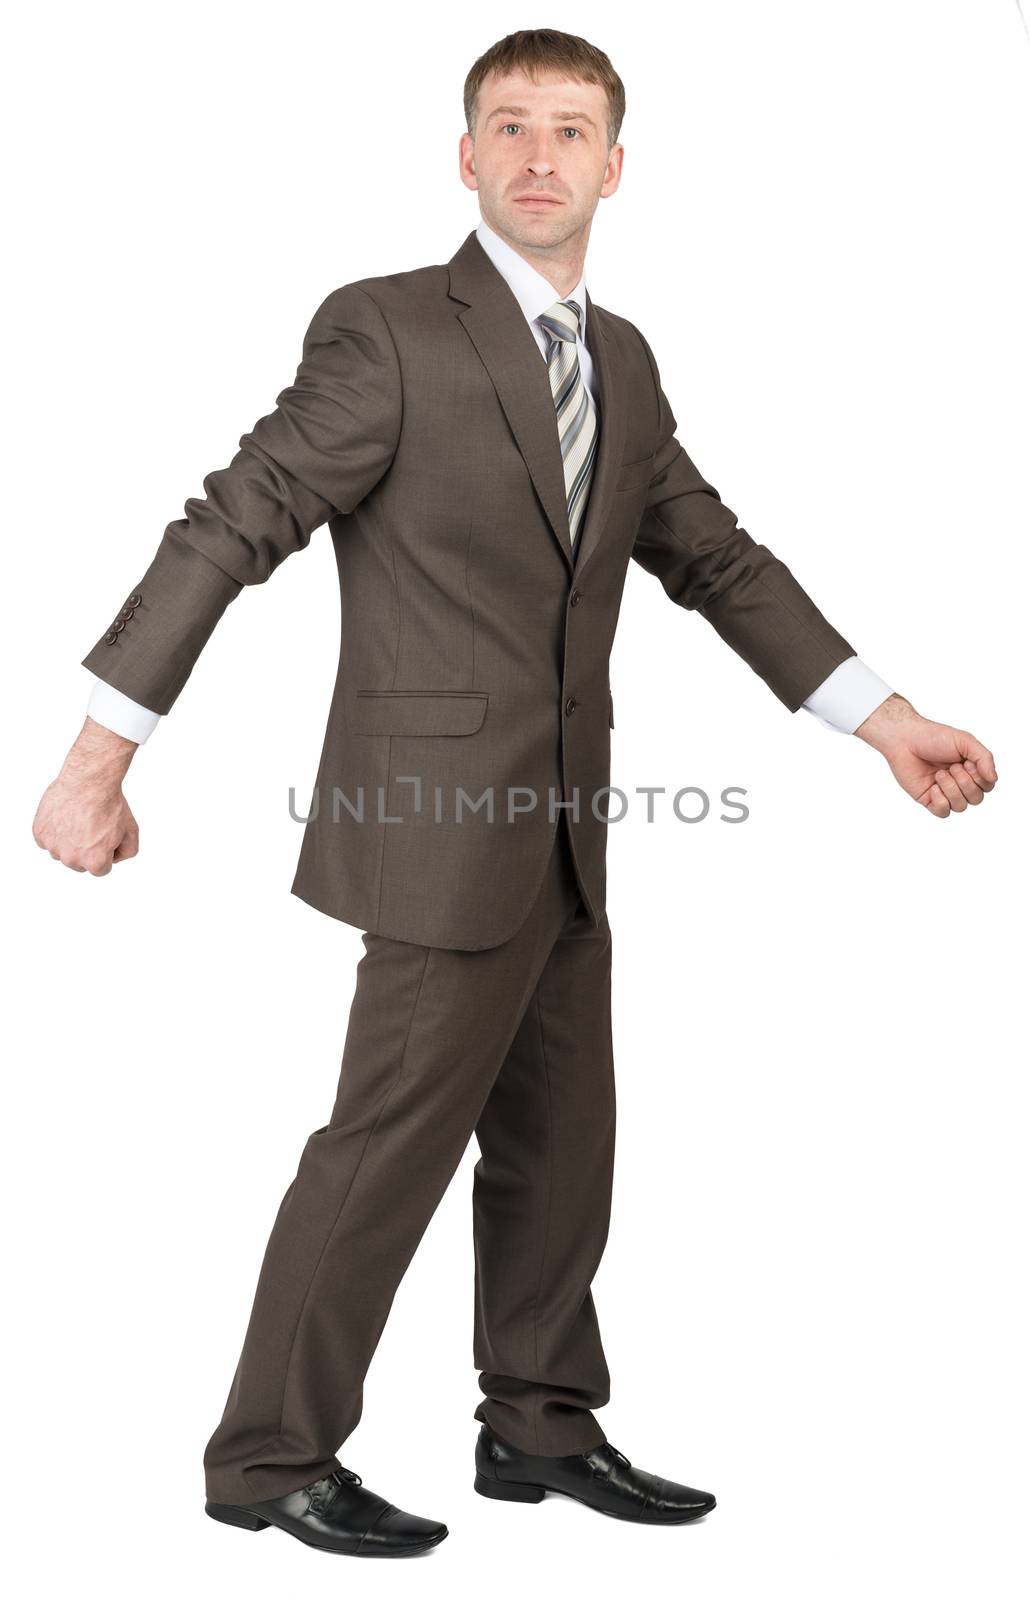 Businessman in suit ready to work isolated on white background. Looking at camera